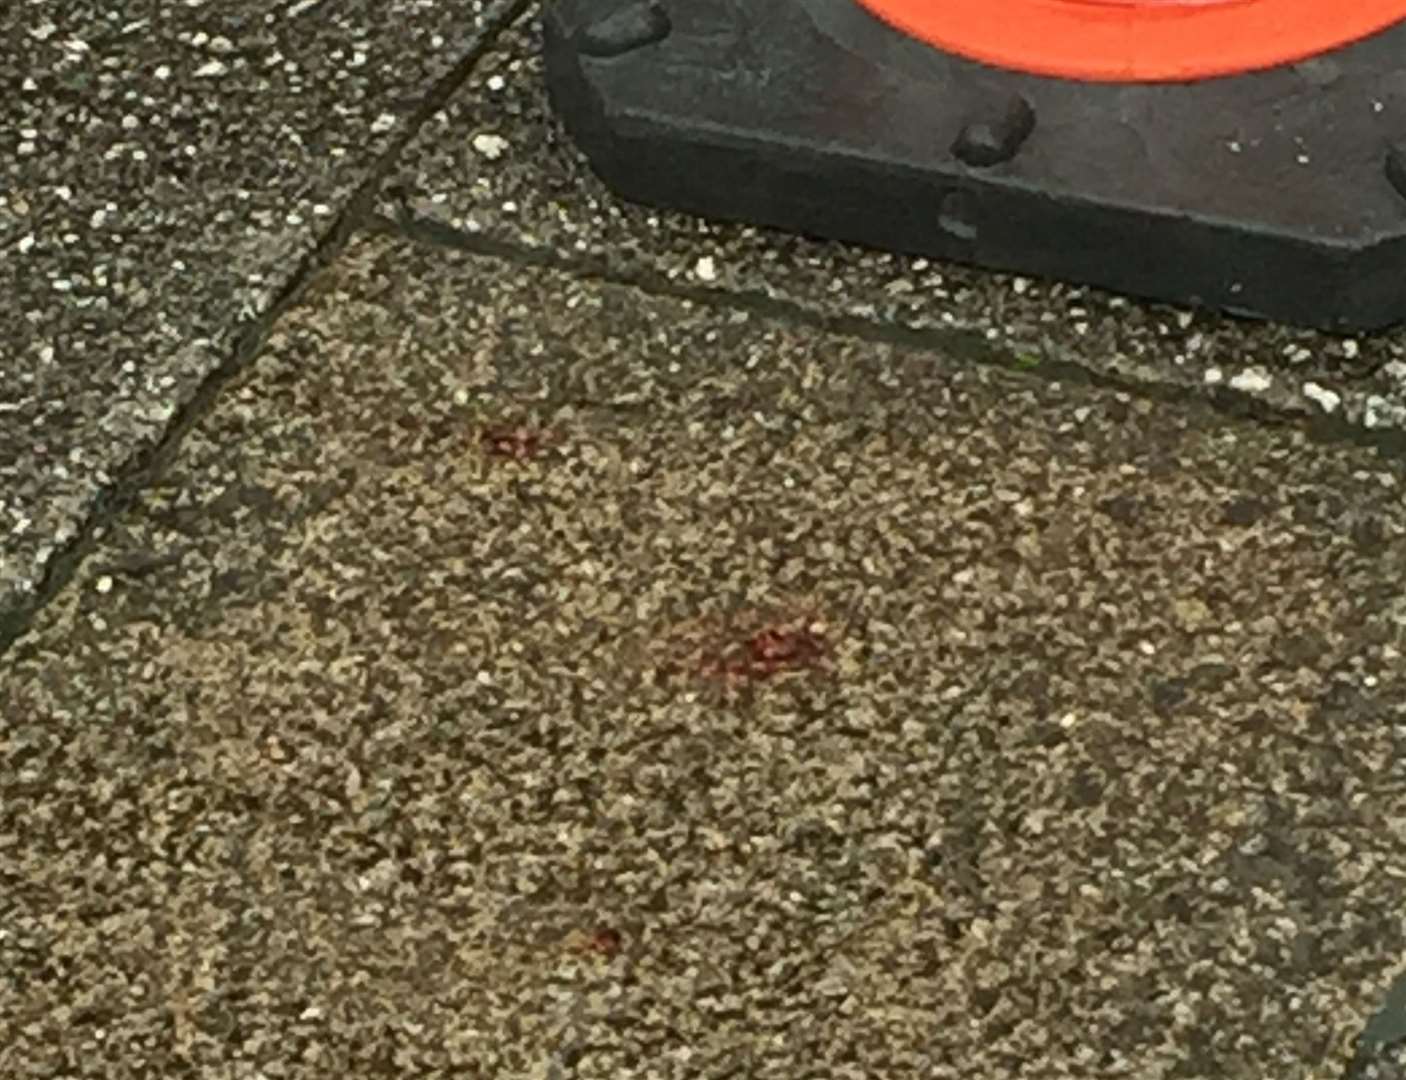 Blood can be seen on the floor (22574560)